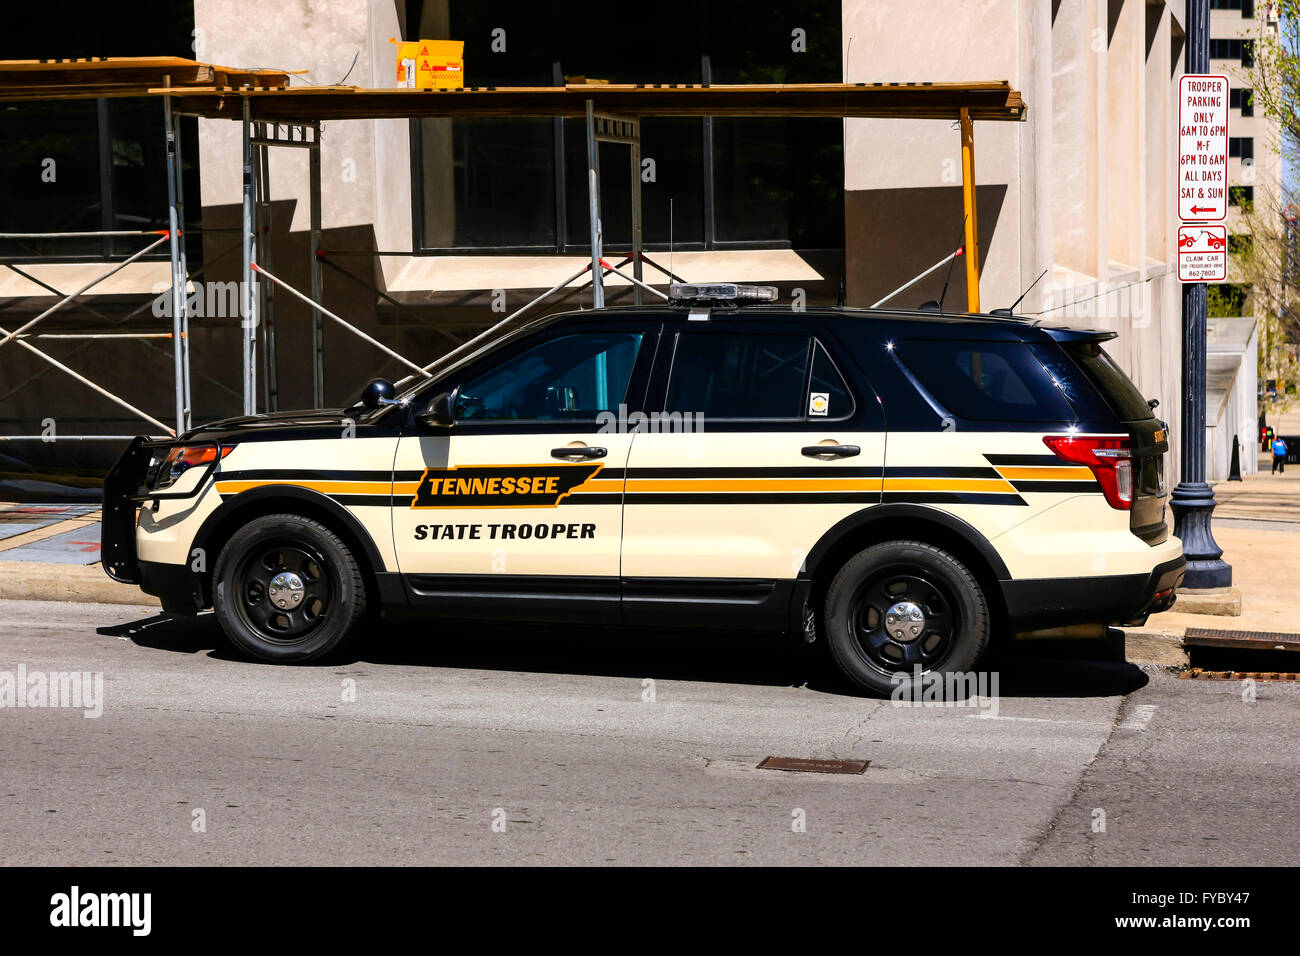 A Tennessee State Trooper vehicle parked on the street in Nashville Stock Photo